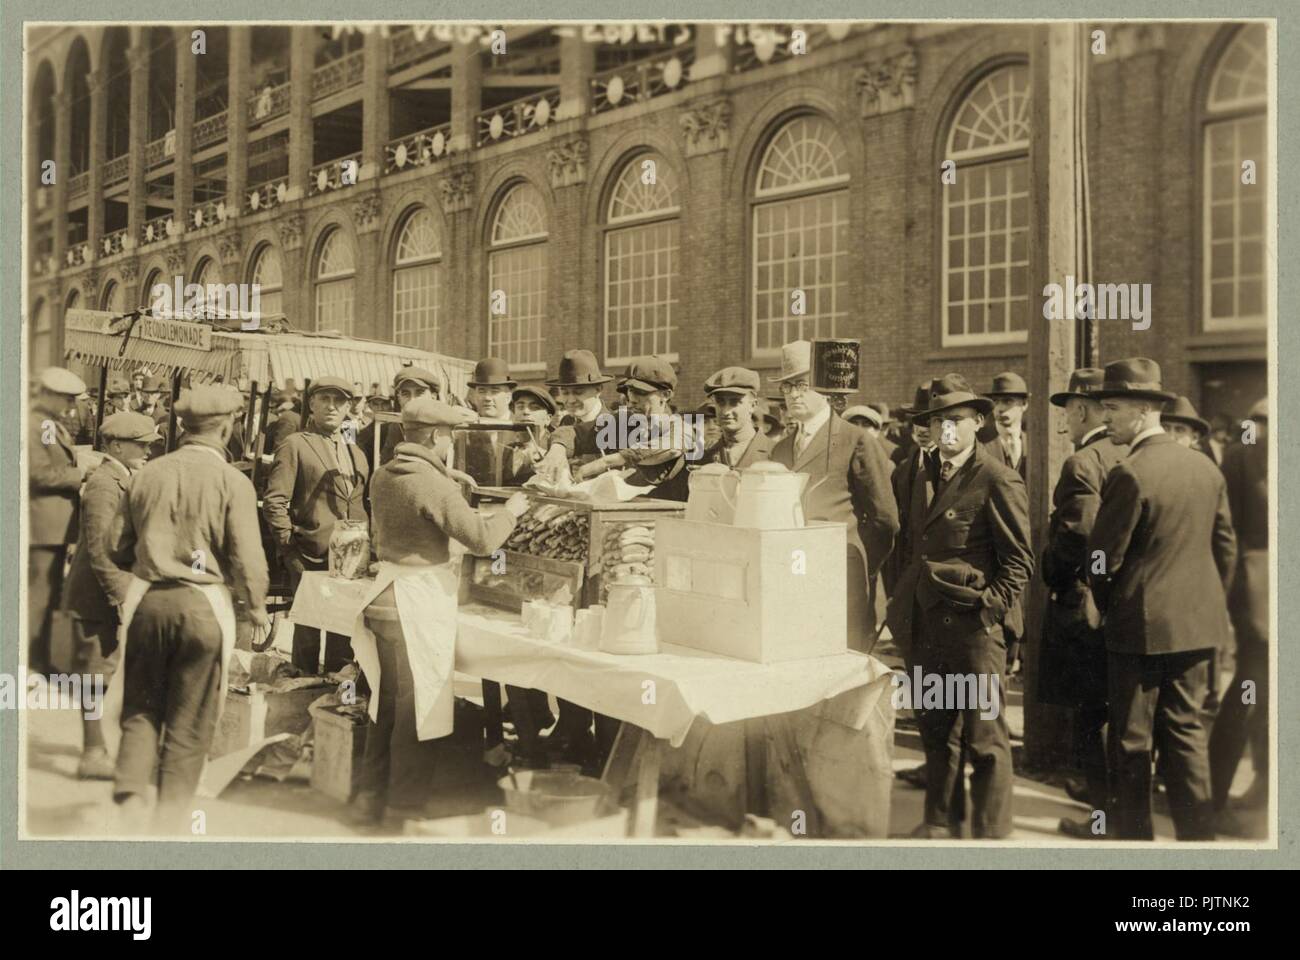 Baseball fans-‘Hot dogs‘ for fans waiting for gates to open at Ebbets Field, Oct. 6, 1920 Stock Photo